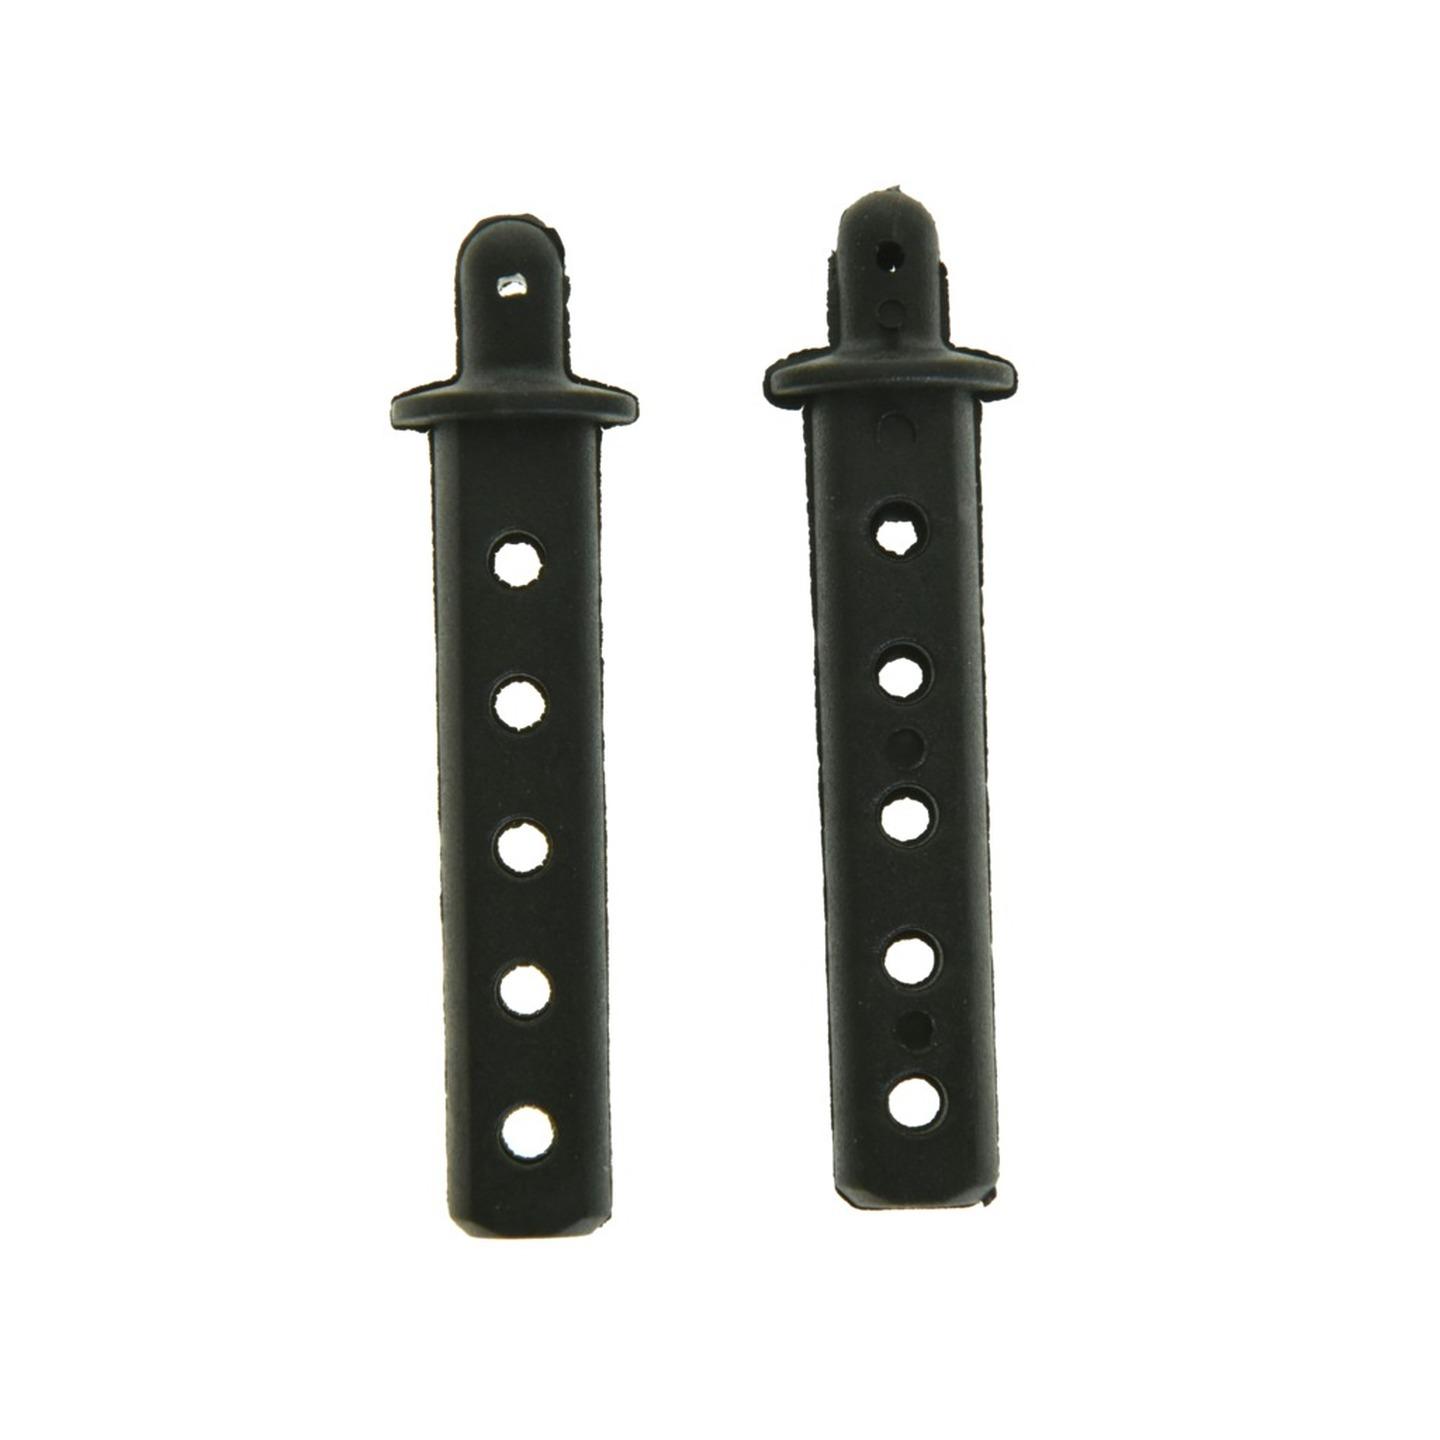 Spare Pillars to Suit GT4800/GT4802 R/C Cars - 2 Pack